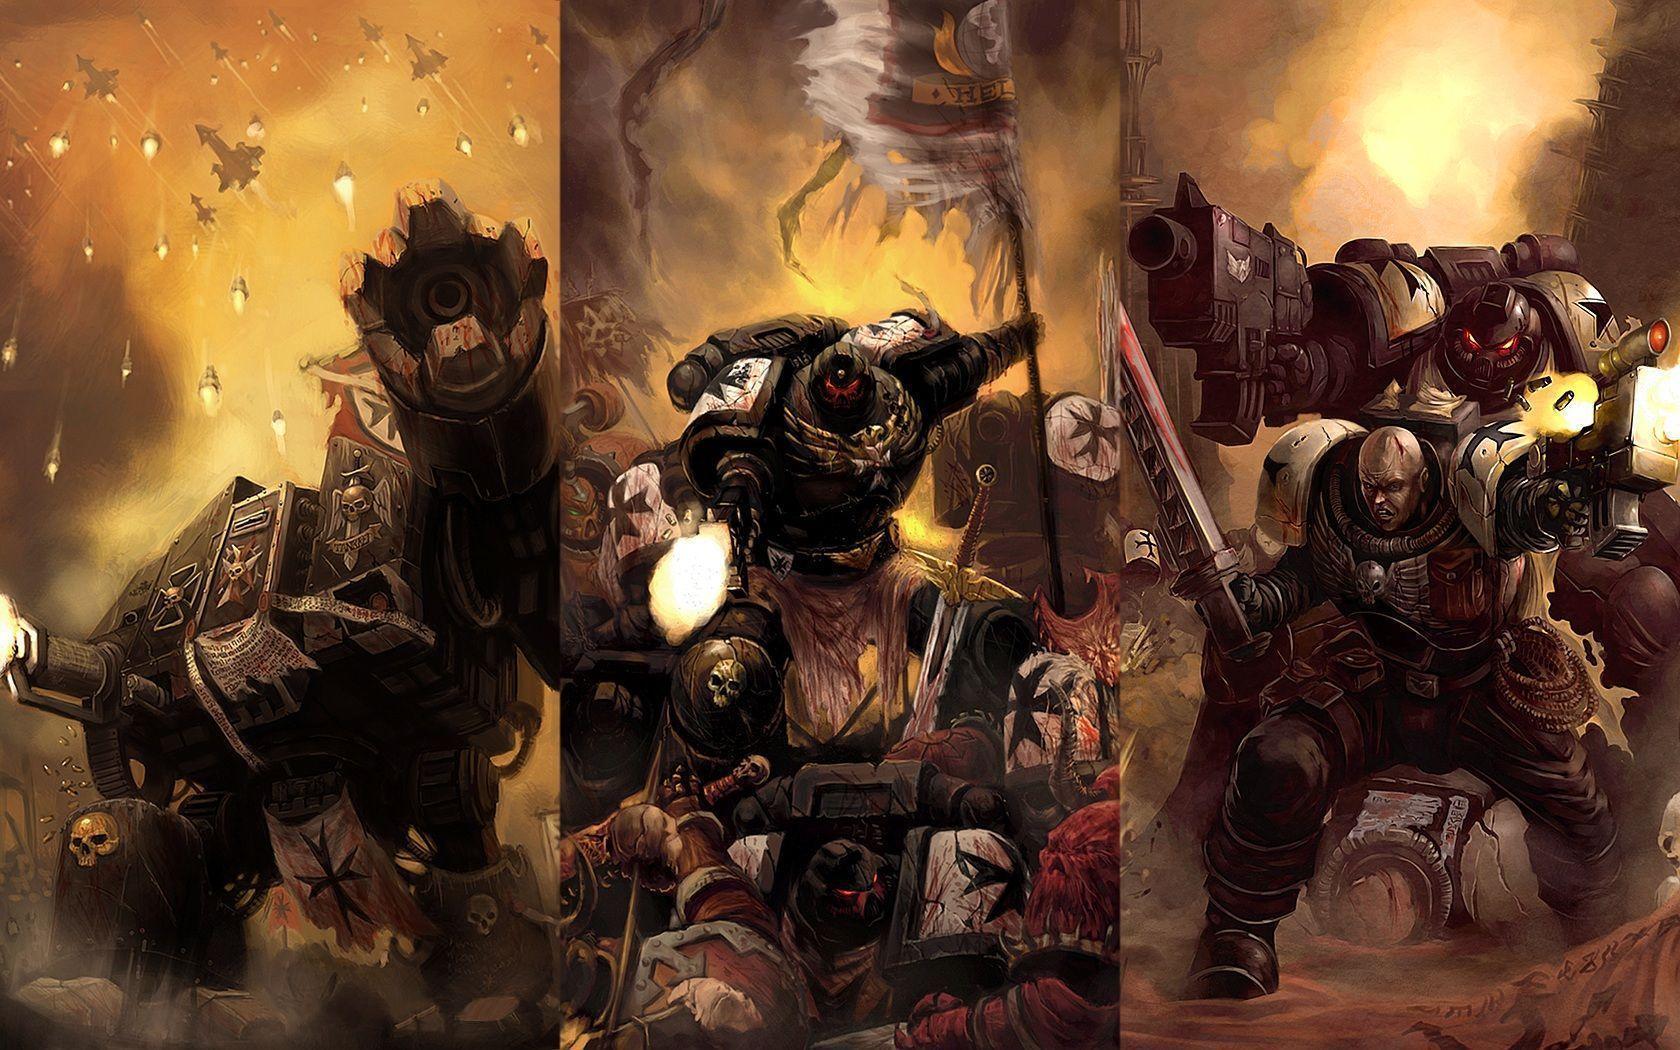 Warhammer 7543 HD Wallpaper Picture. Top Wallpaper Gallery Photo